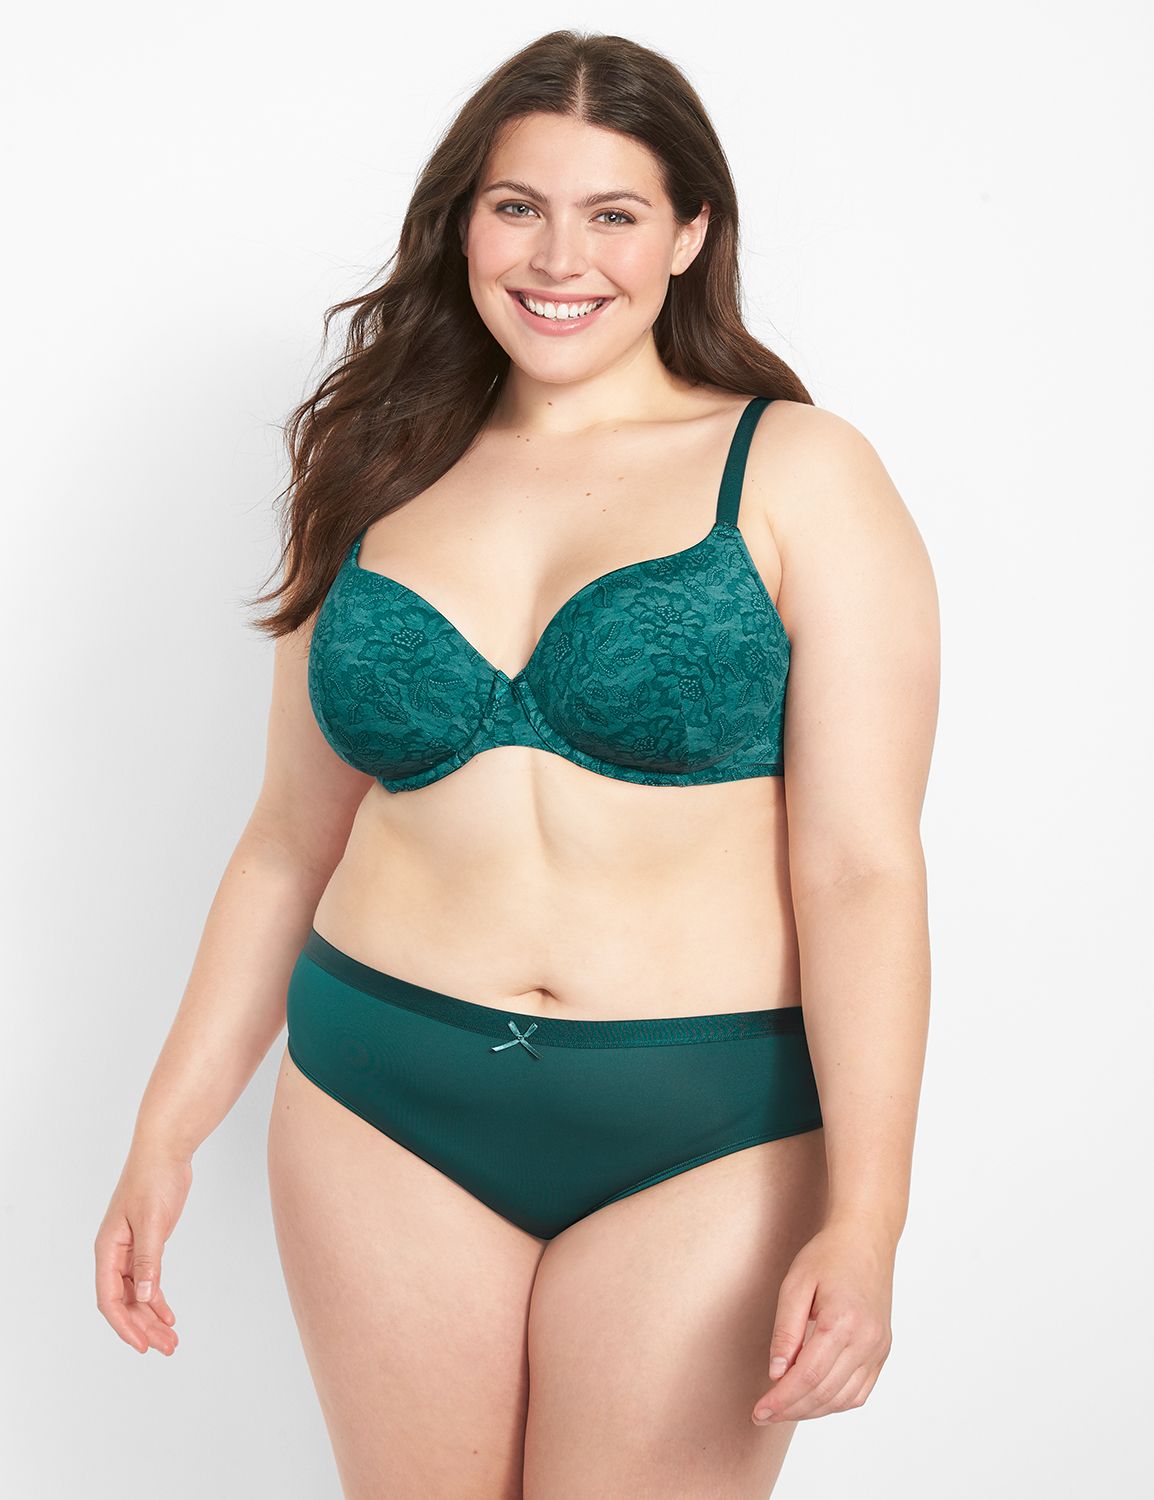 Cacique Lane Bryant Green Floral Lightly Lined T-Shirt No Wire Bra Size  42DDD - $25 - From TheCozy